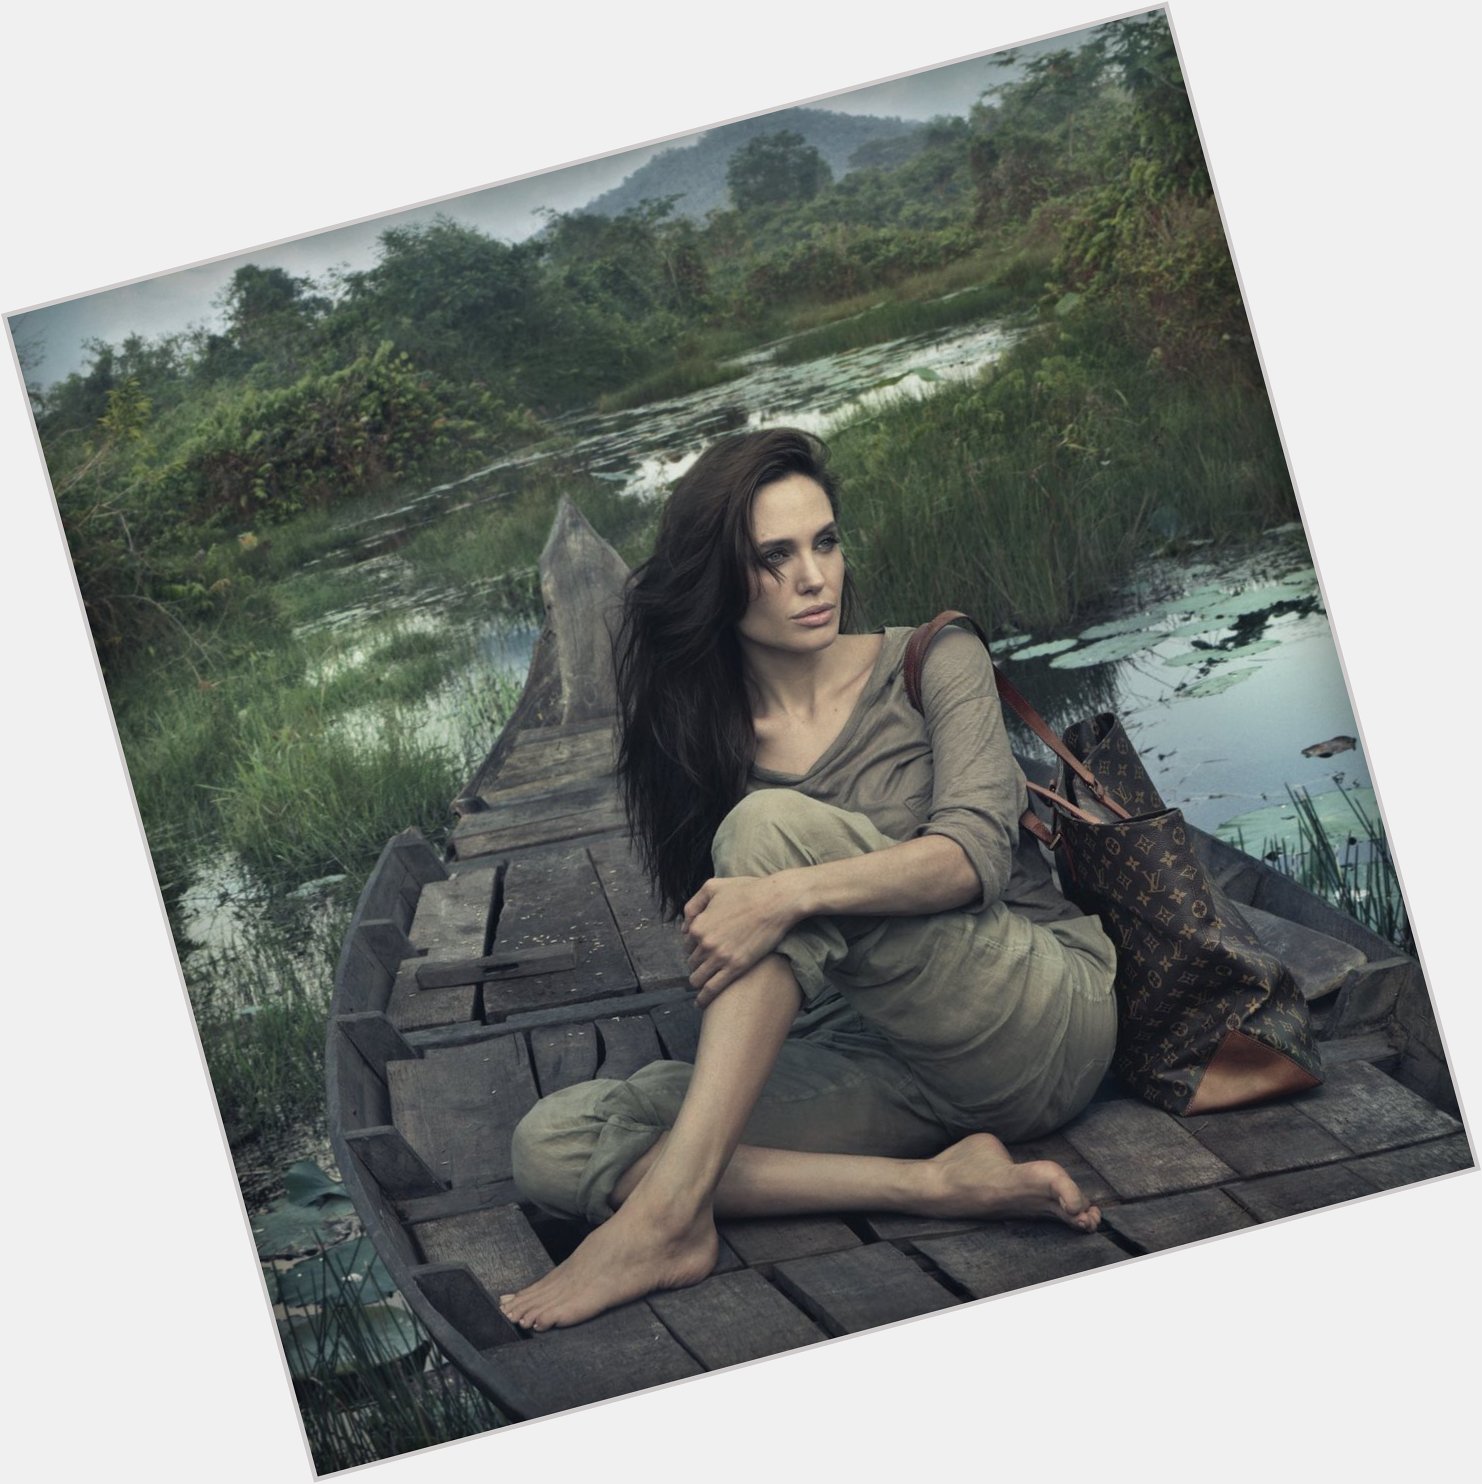 **Happy 44th Birthday Angelina Jolie**
[by Annie Leibovitz for Louis Vuitton in Cambodia, May 2011] 